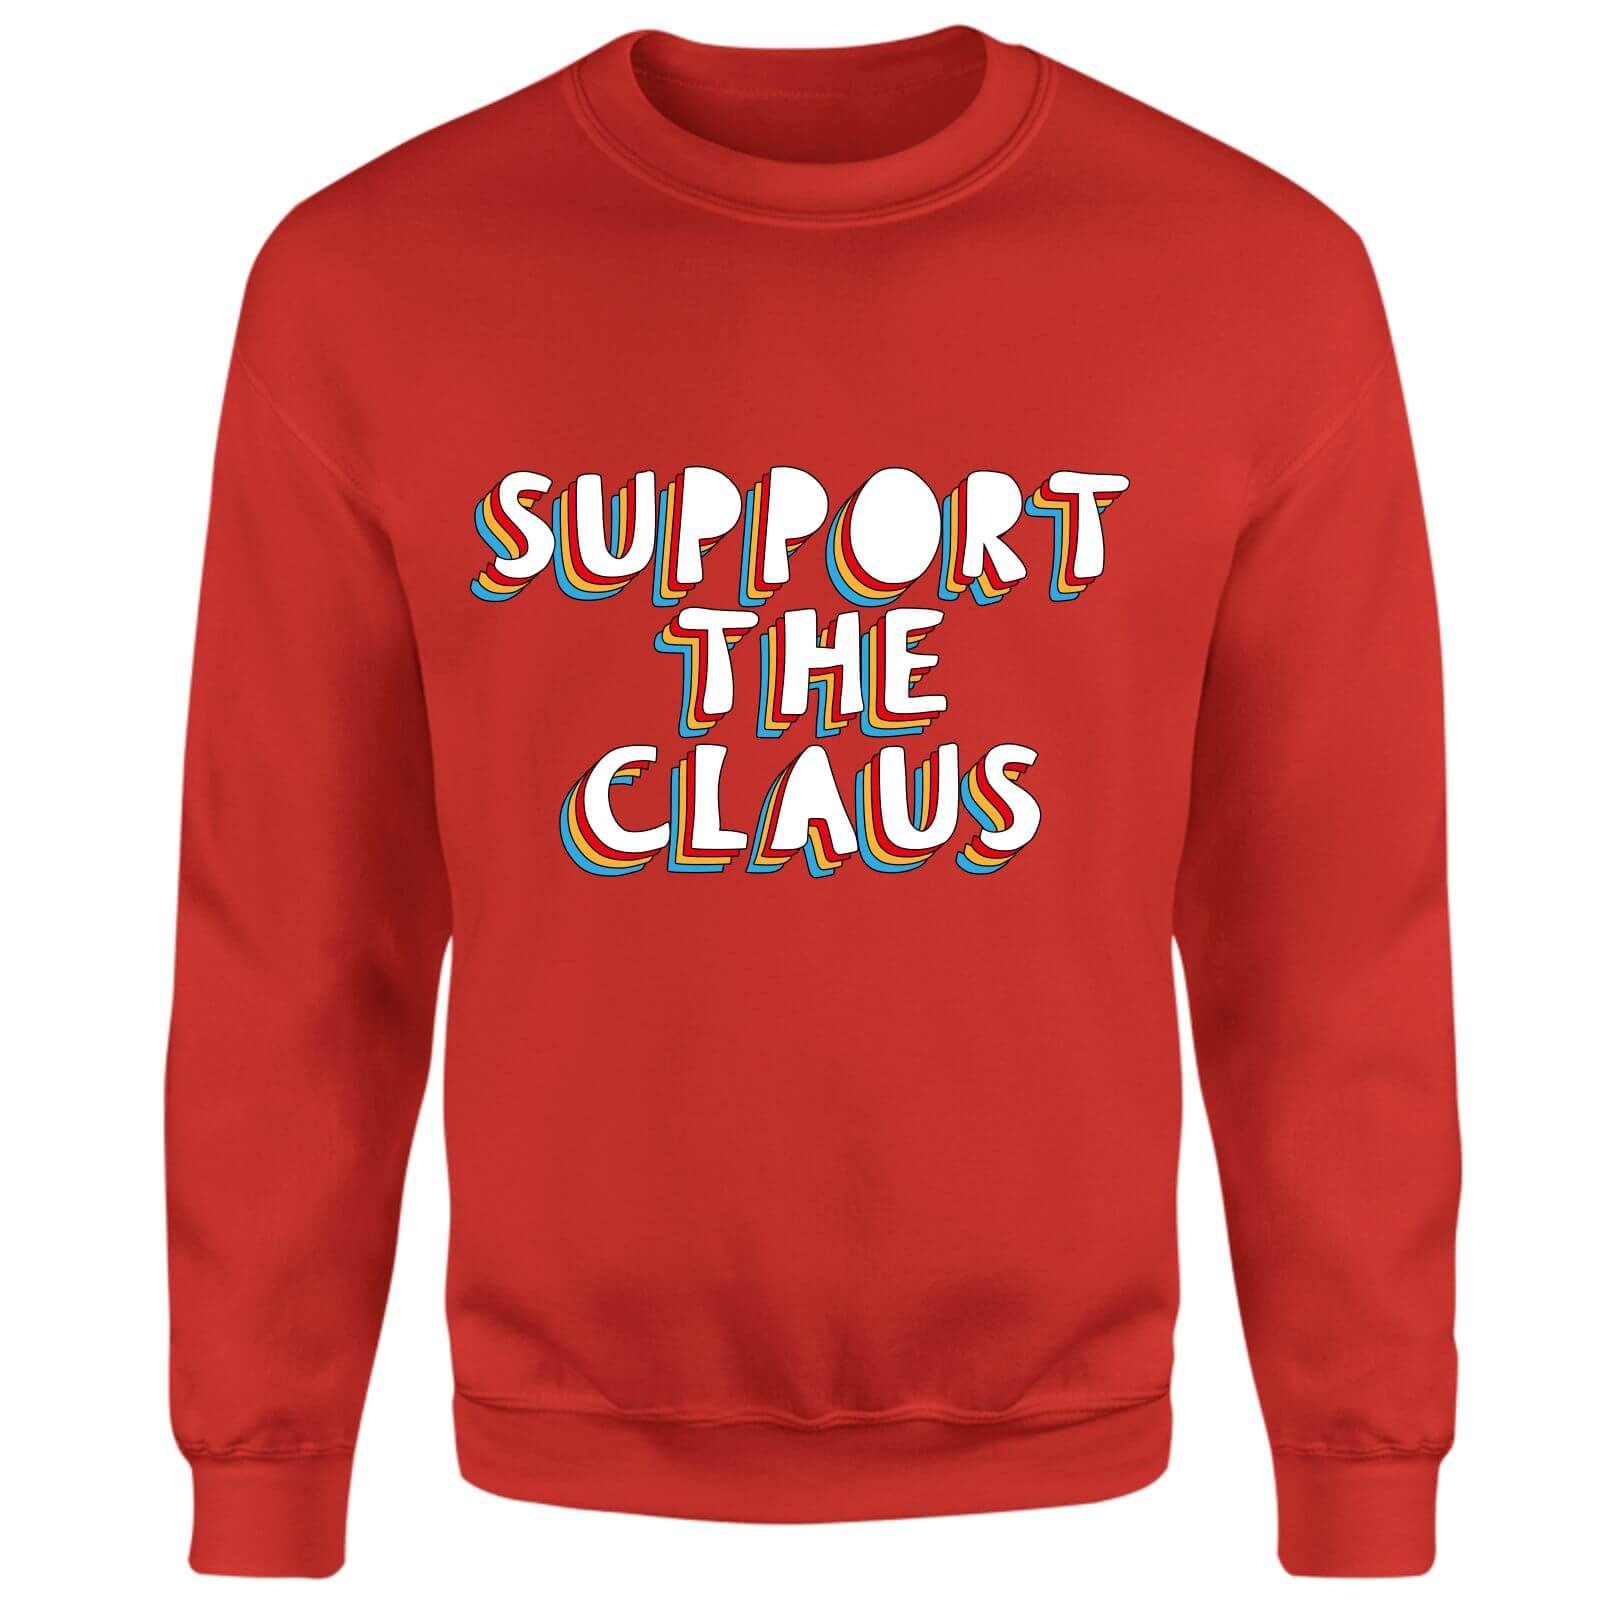 Support The Claus Sweatshirt - Red - XS - Red